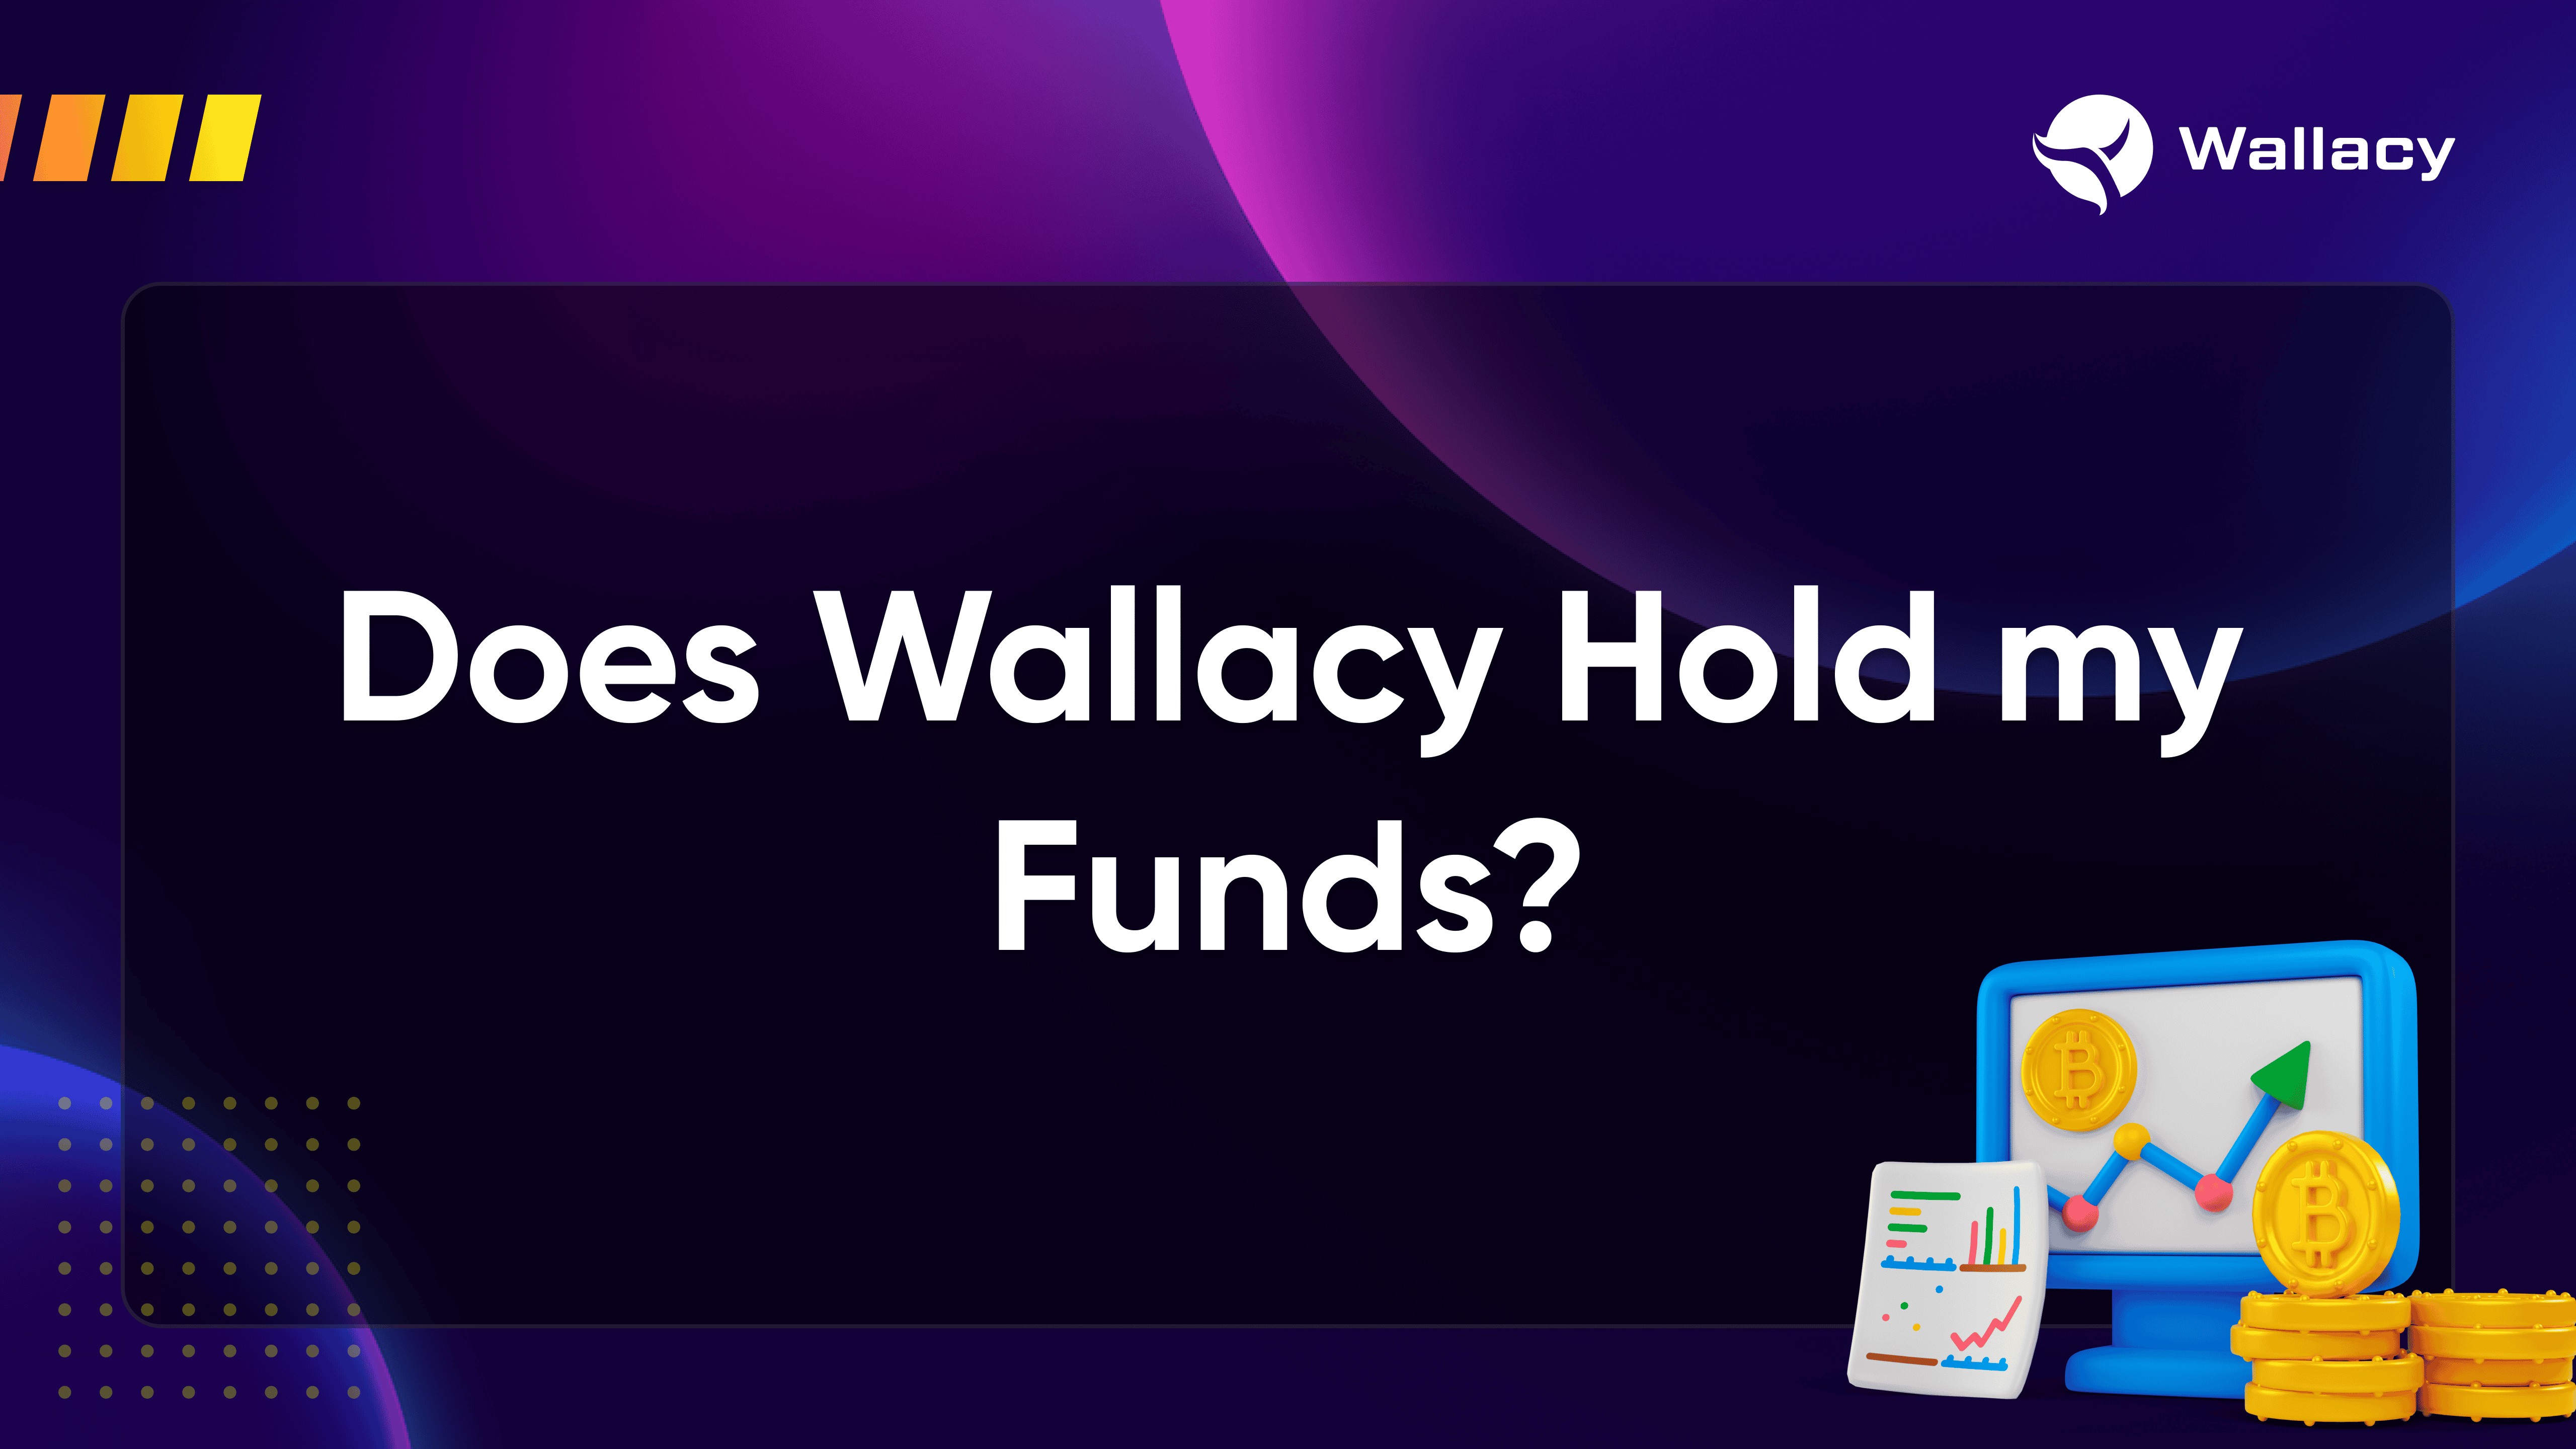 Does Wallacy Hold my Funds?